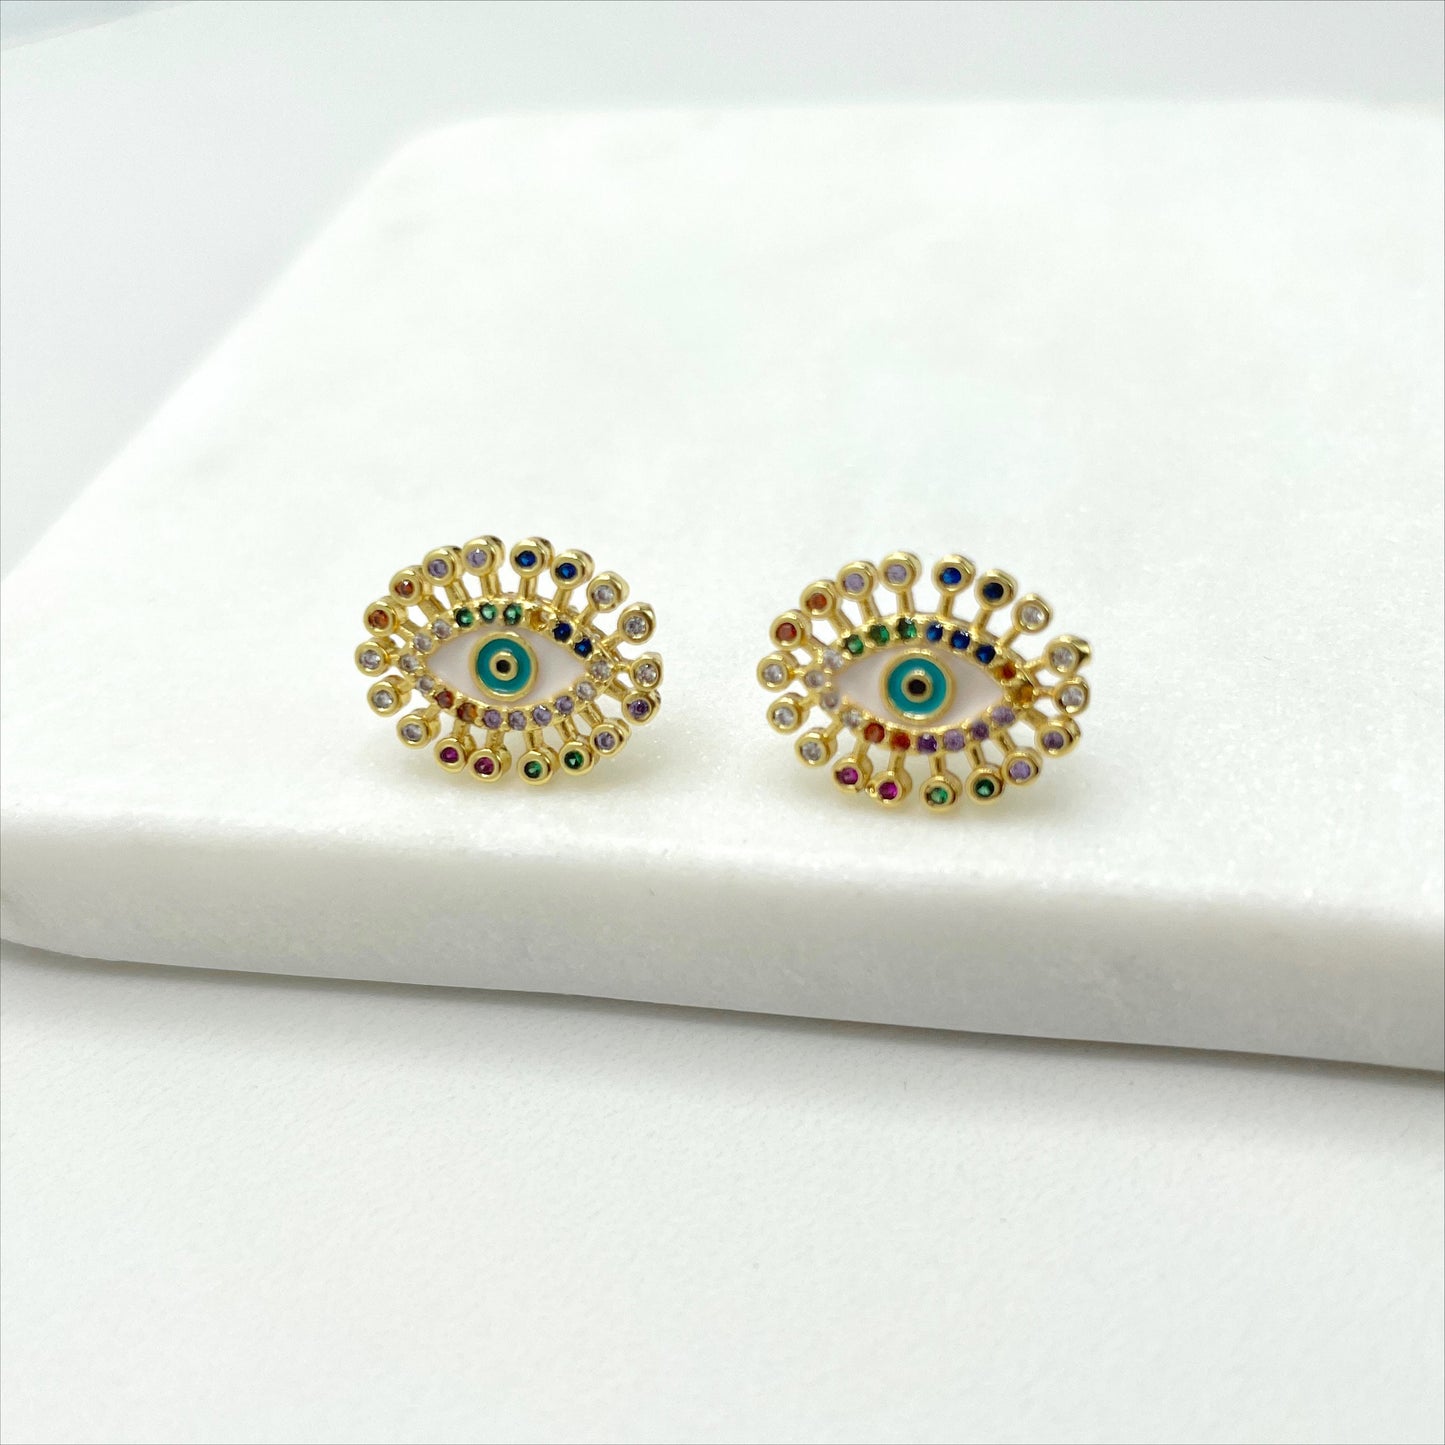 18k Gold Filled Colored Enamel & Cubic Zirconia Evil Eyes, 15mm Earrings and 23mm Pendant Charms Wholesale Jewelry Making Supplies